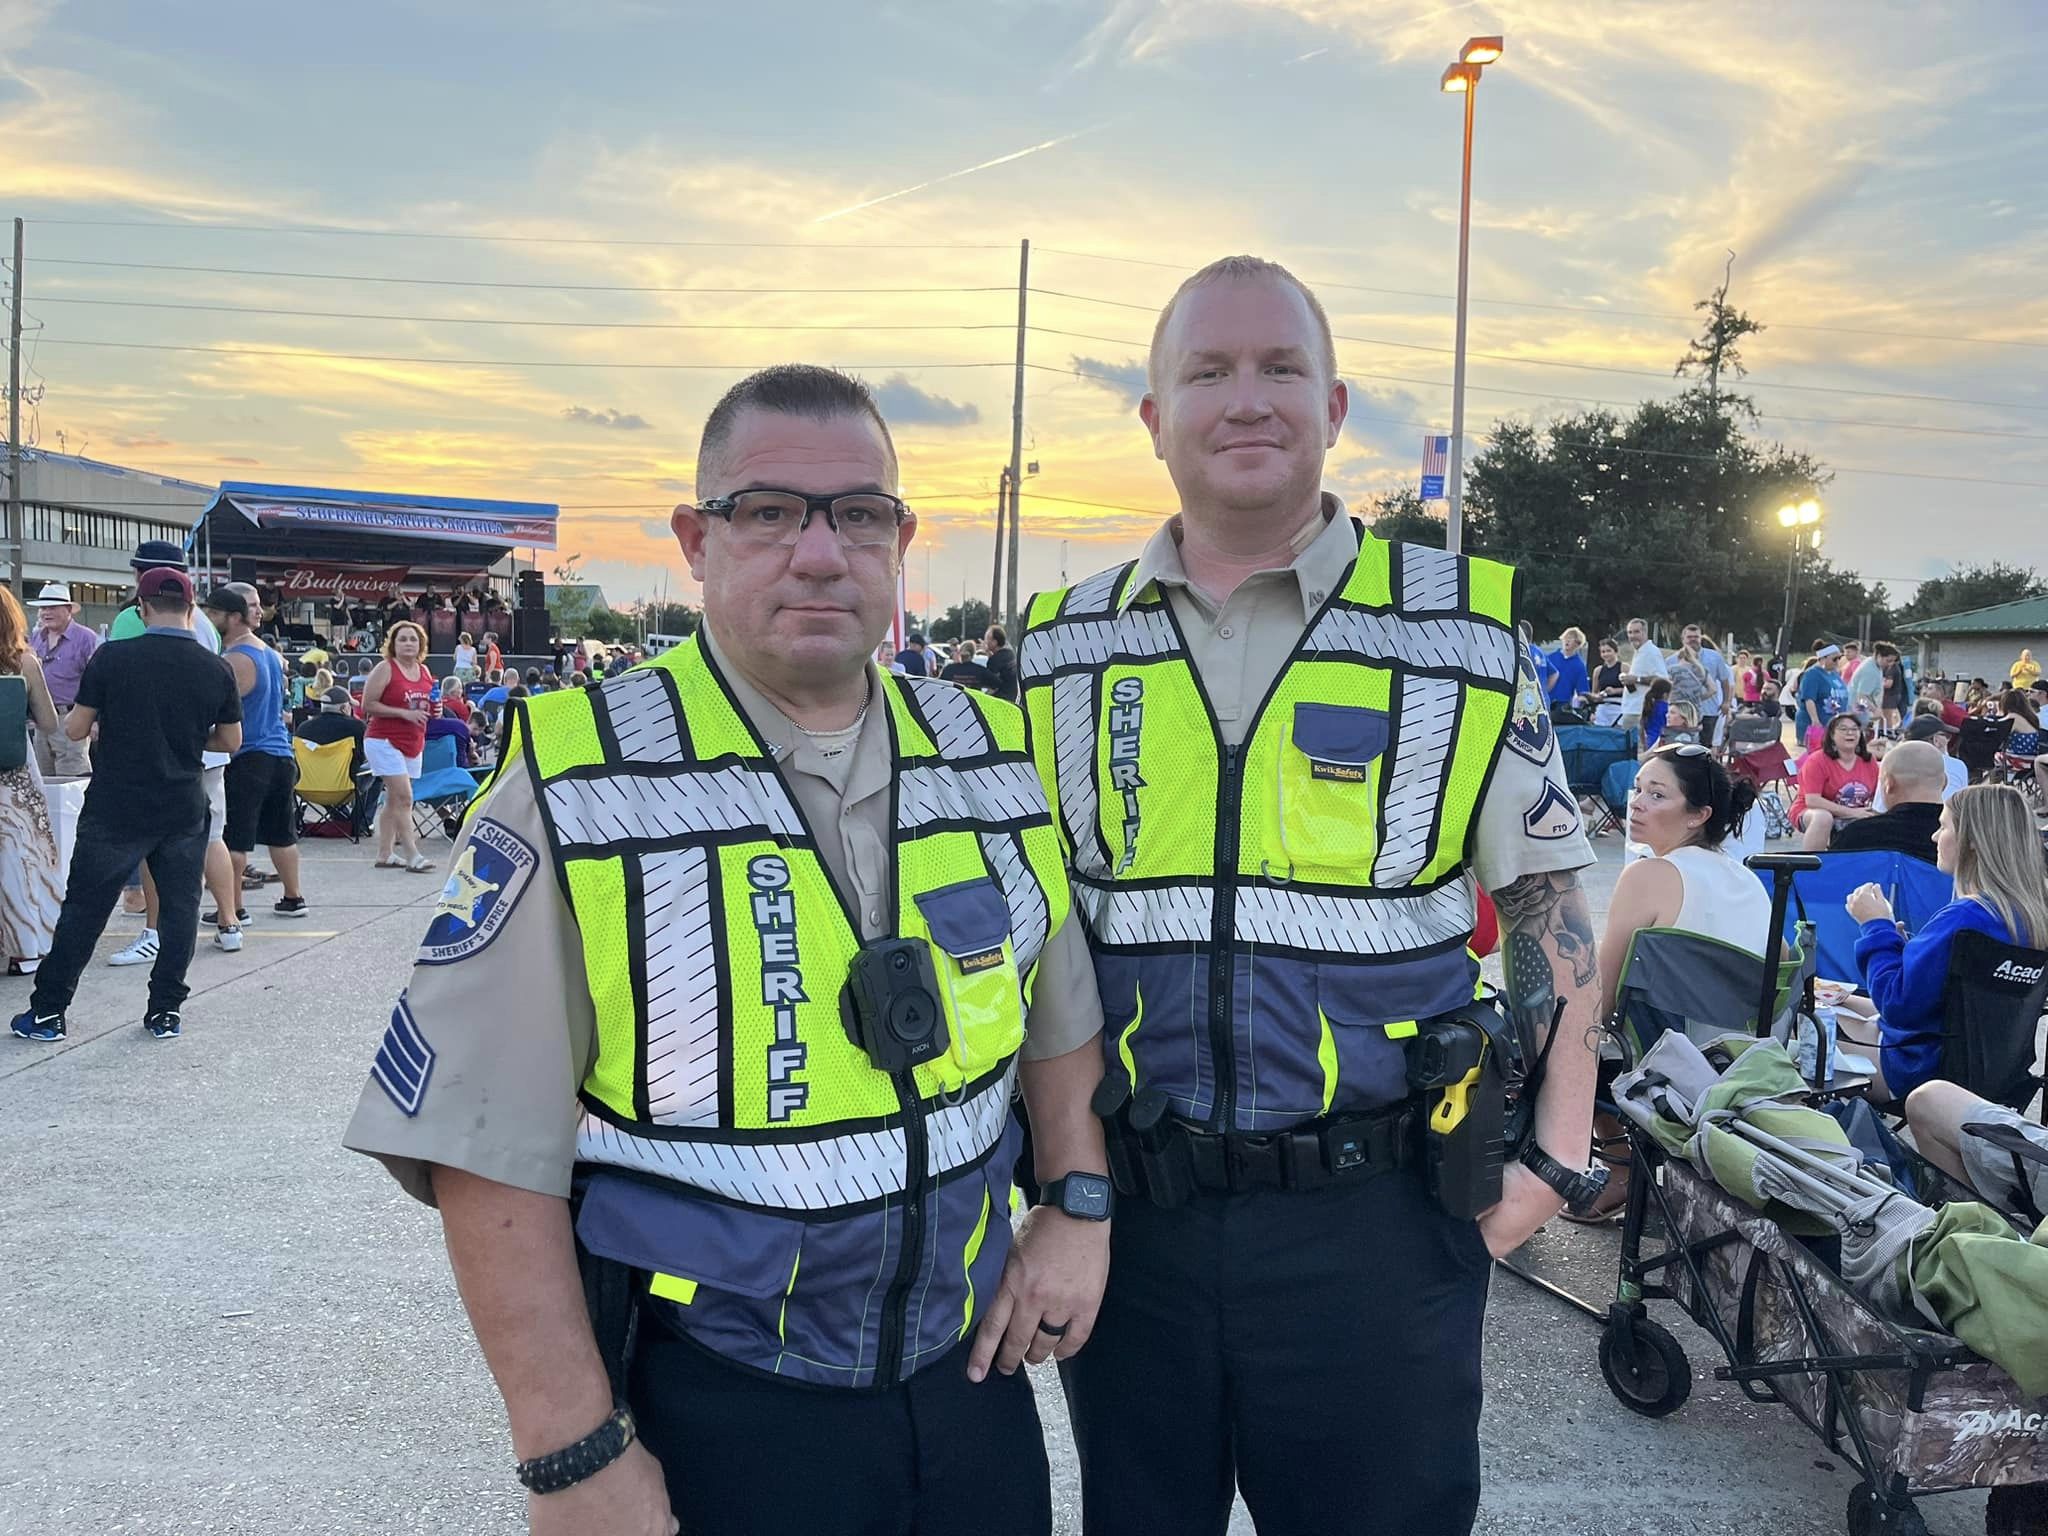 SBSO KEEPING US SAFE at the Fourth of July celebration at Torres Park. 
 #sbso
 #keepingstbernards